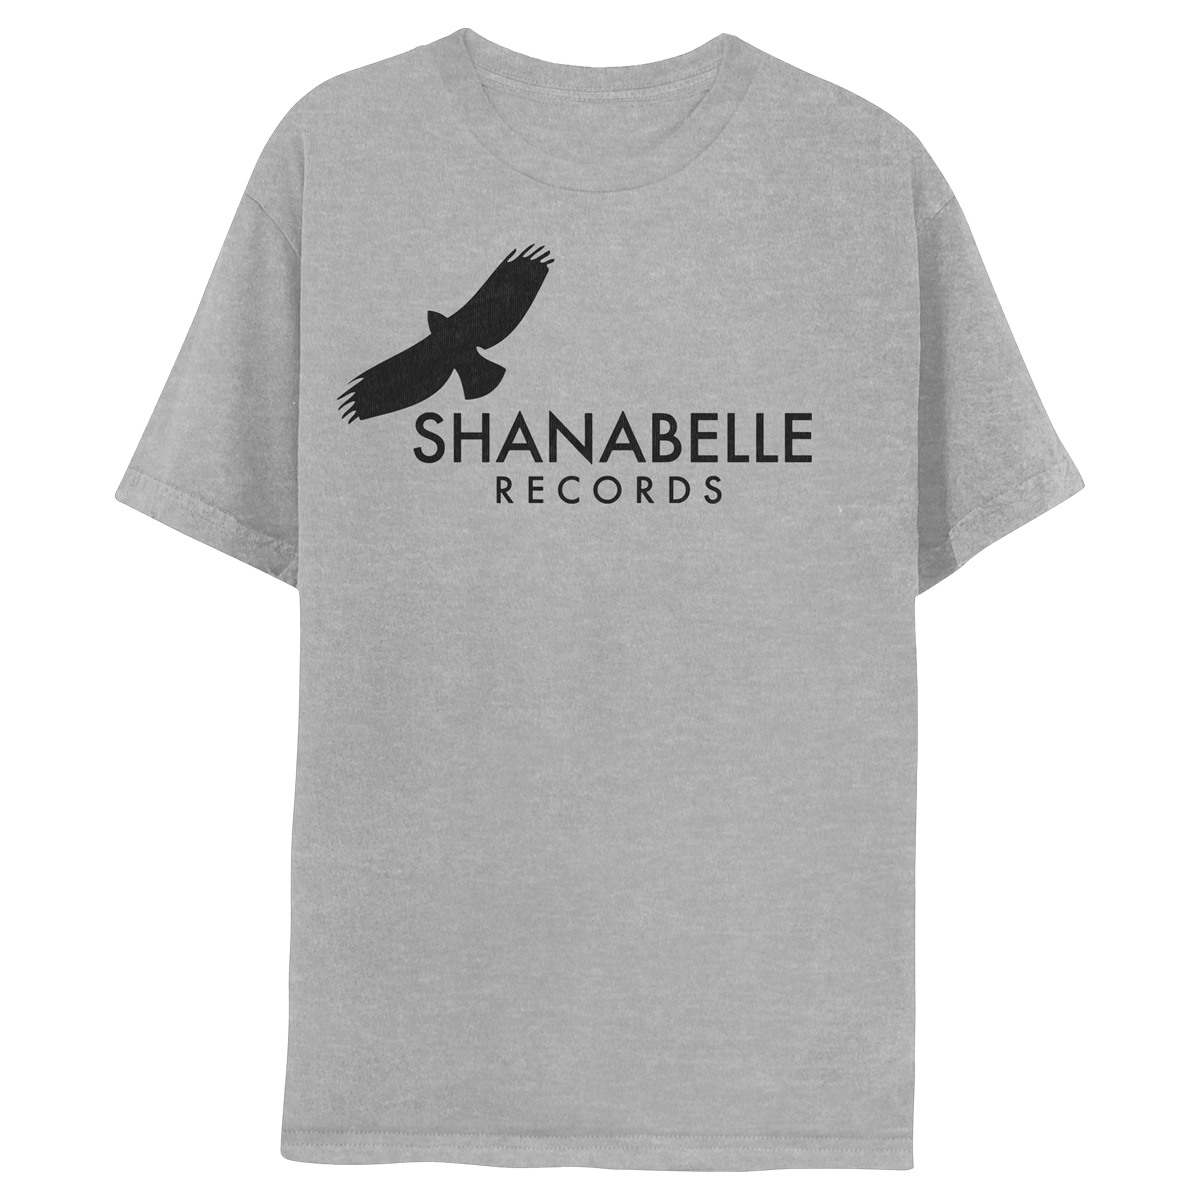 Shanabelle Records Tee